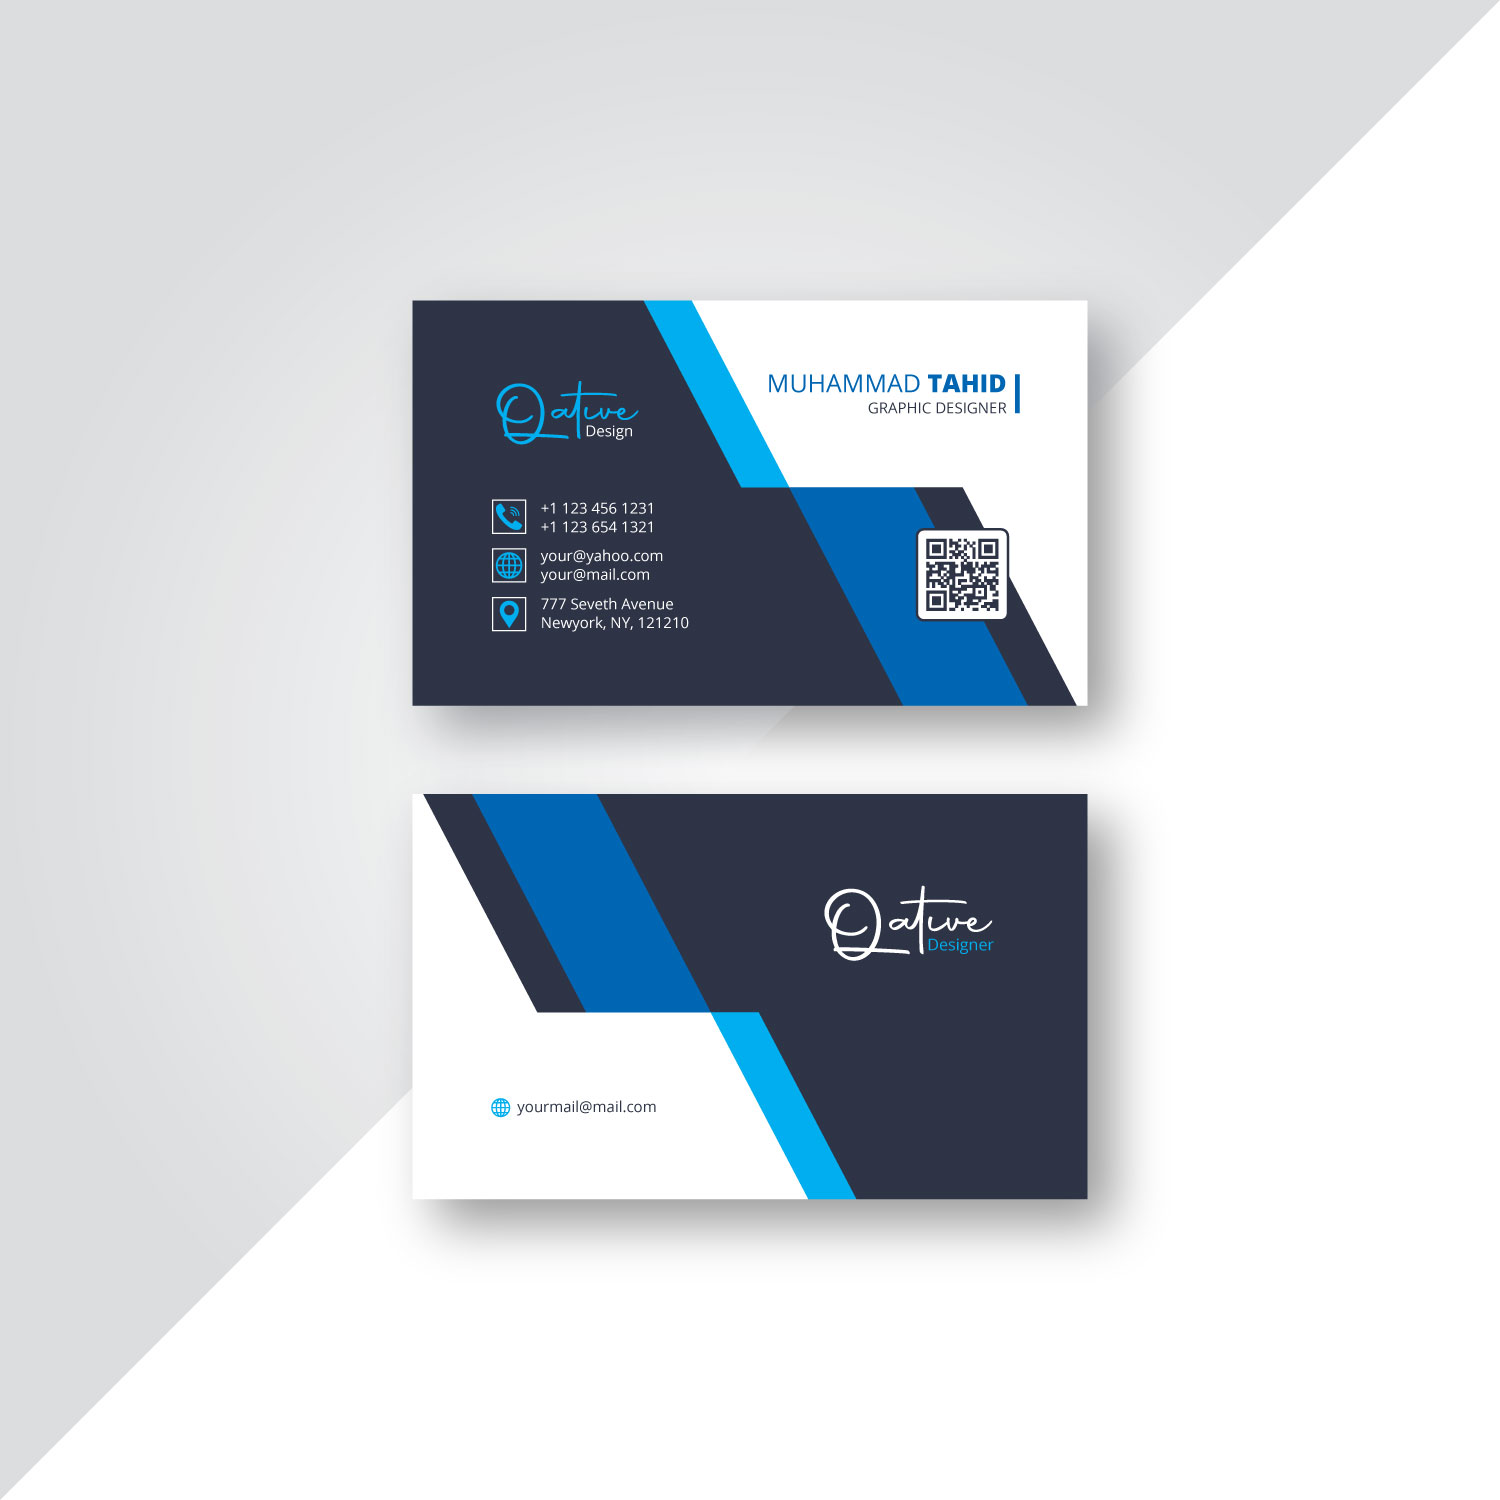 Corporate Business Card Vol 4 cover image.